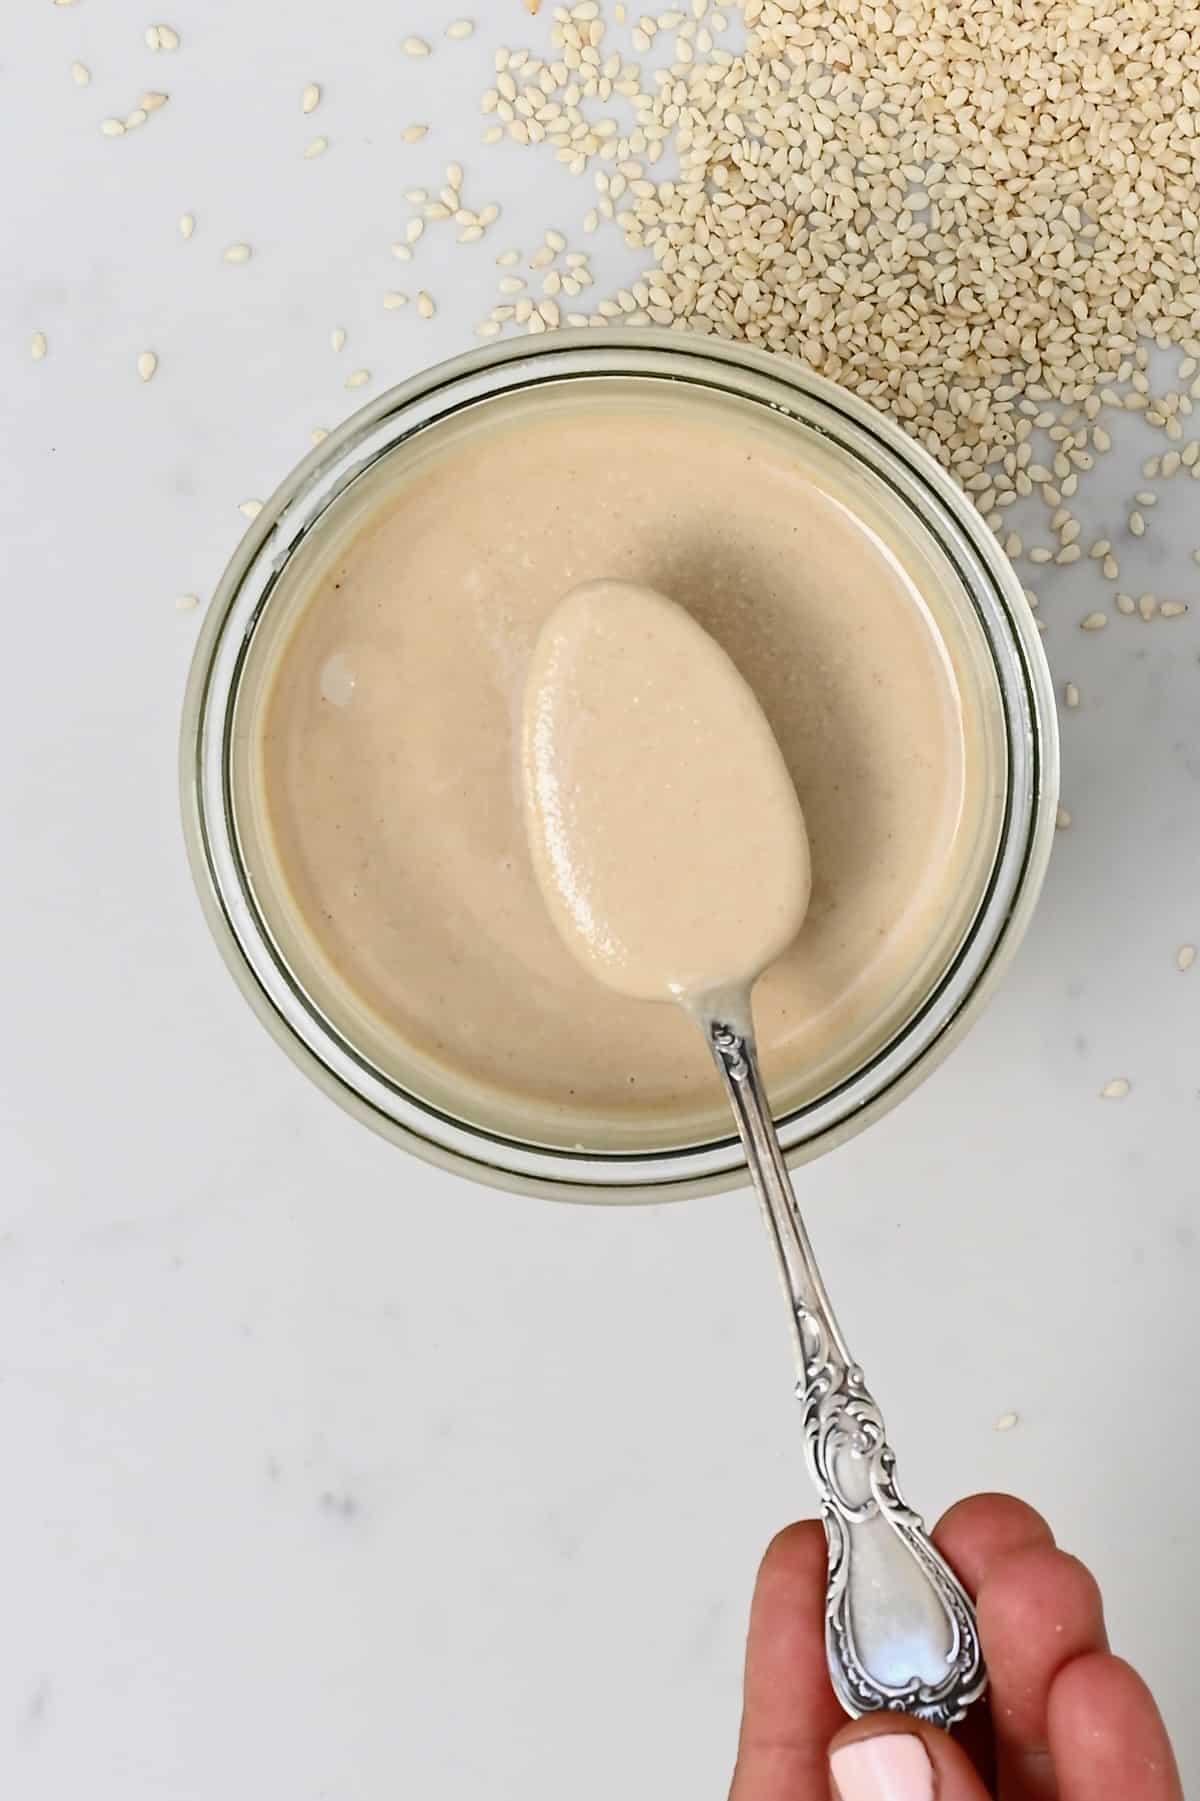 What Is Tahini, and What Is It Made From?